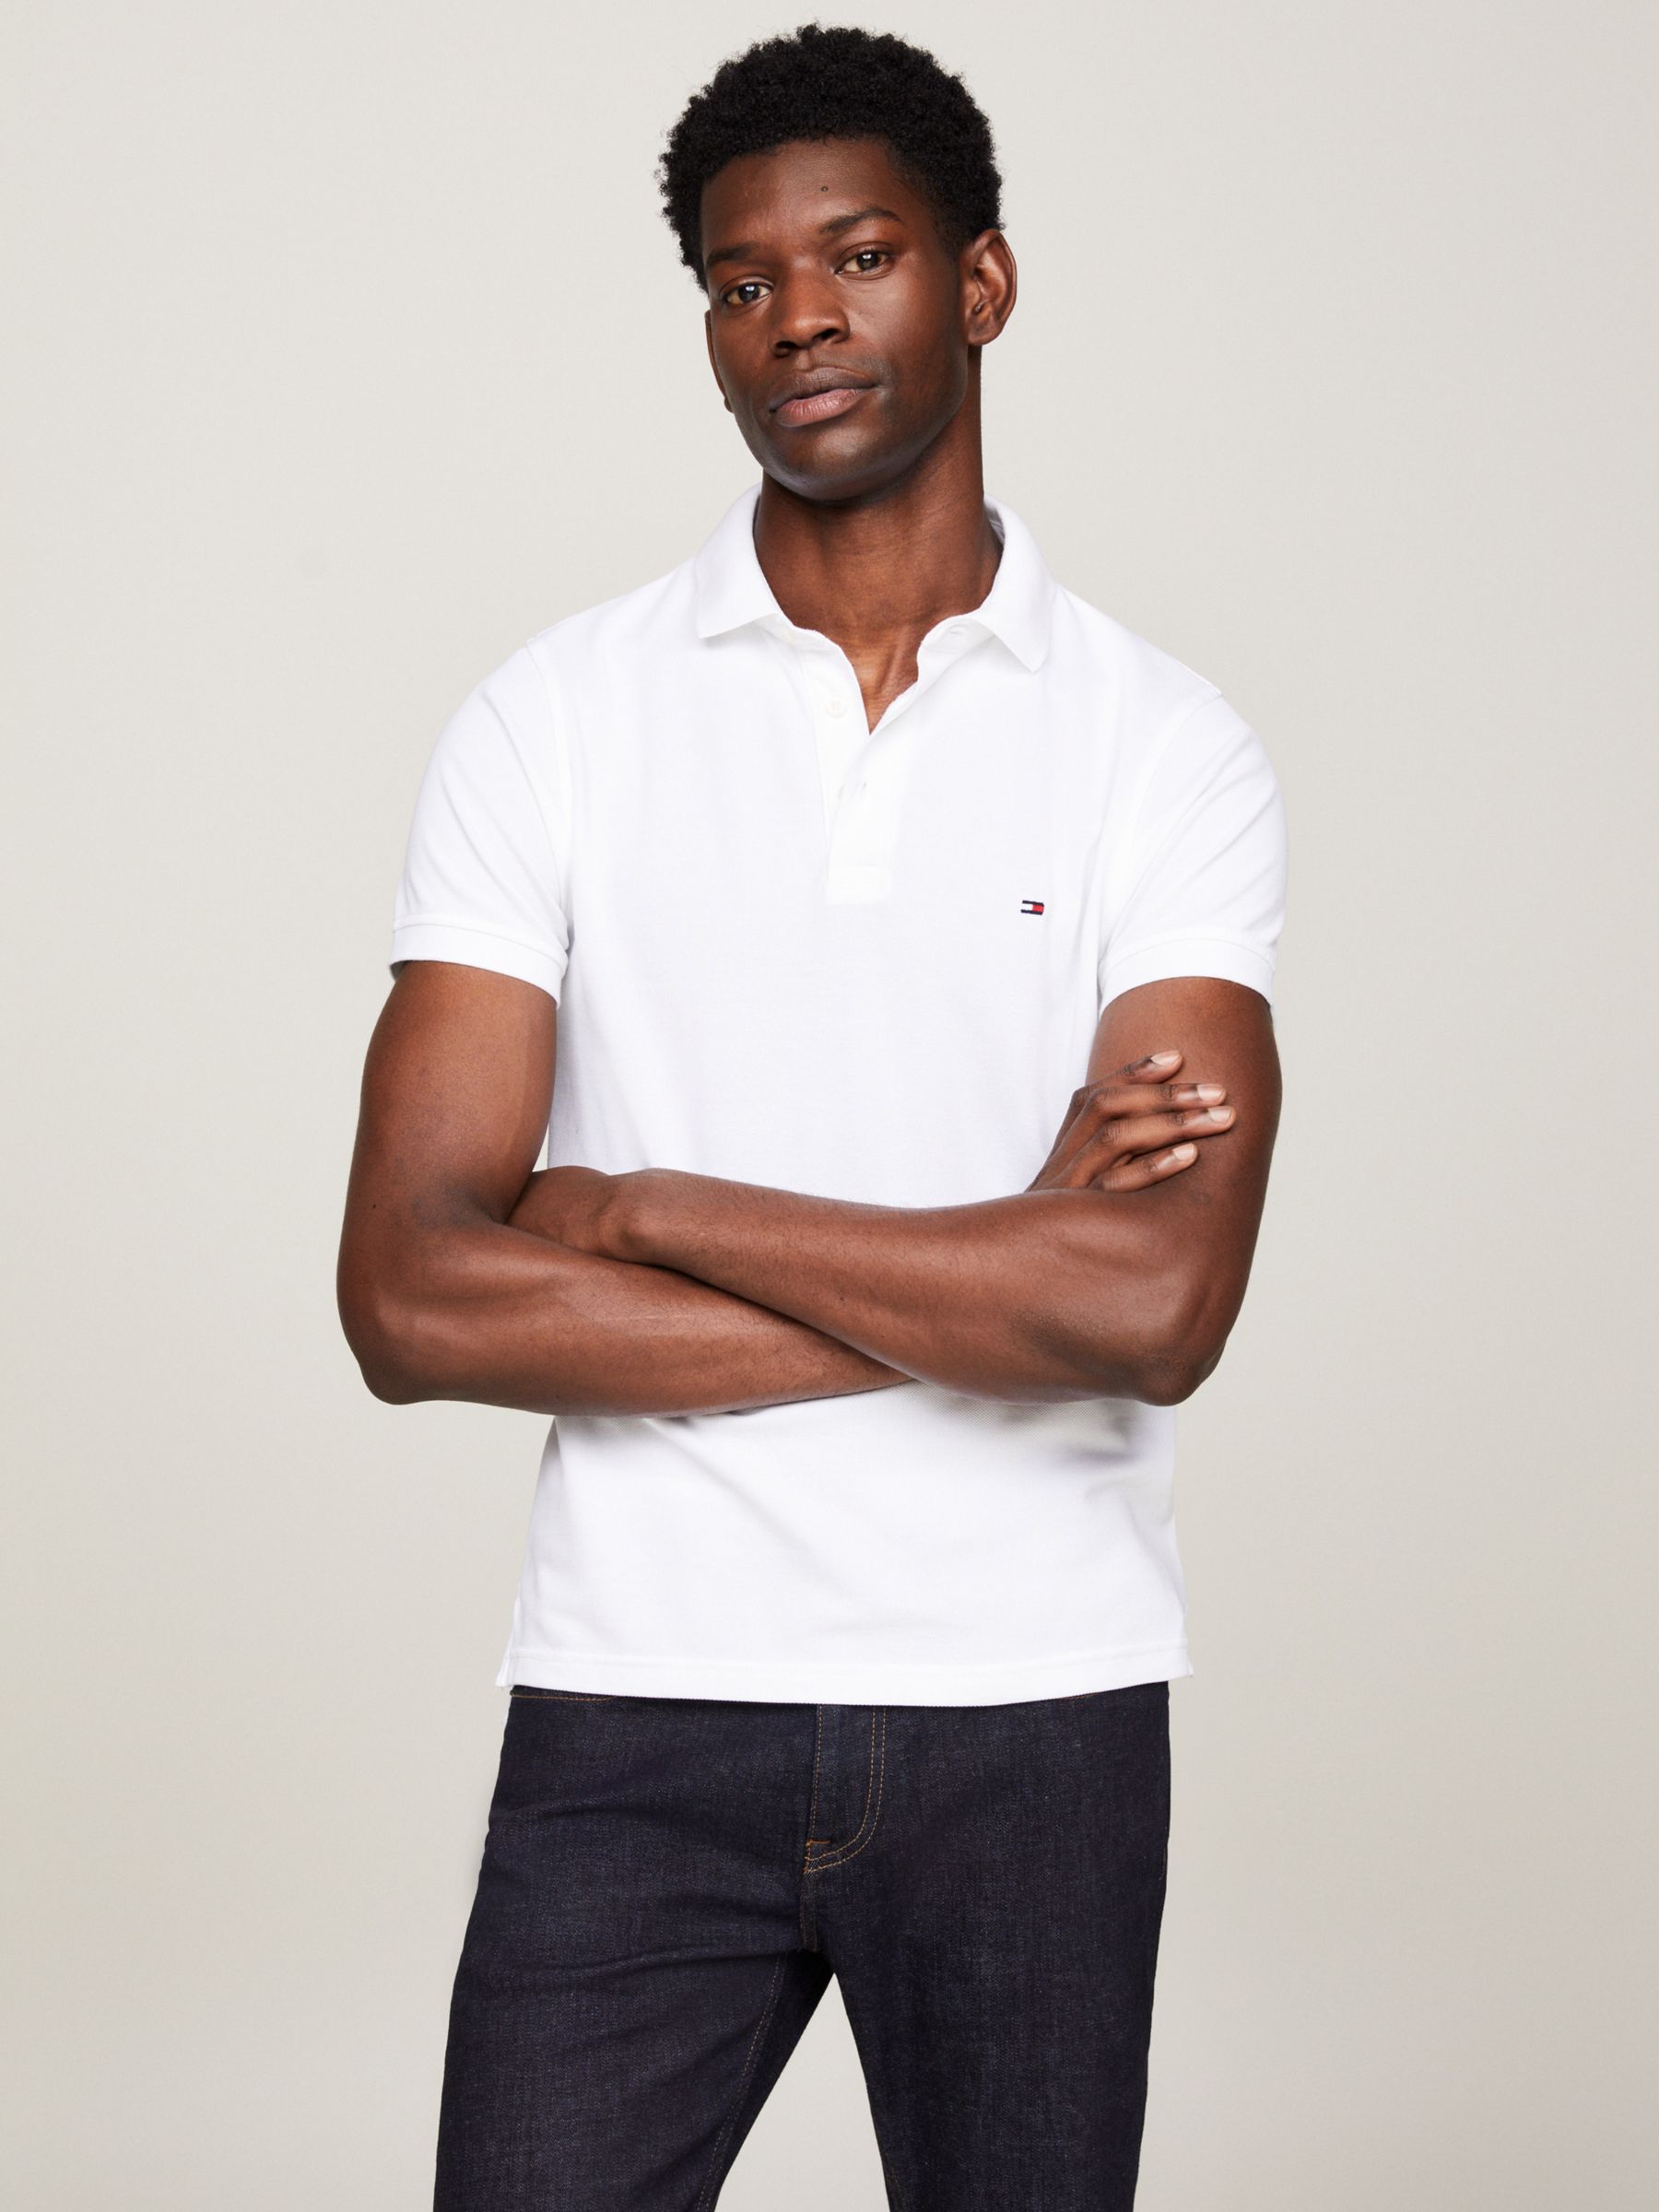 Tommy Hilfiger Tipped Organic Cotton Slim Fit Polo Shirt, White at John  Lewis & Partners